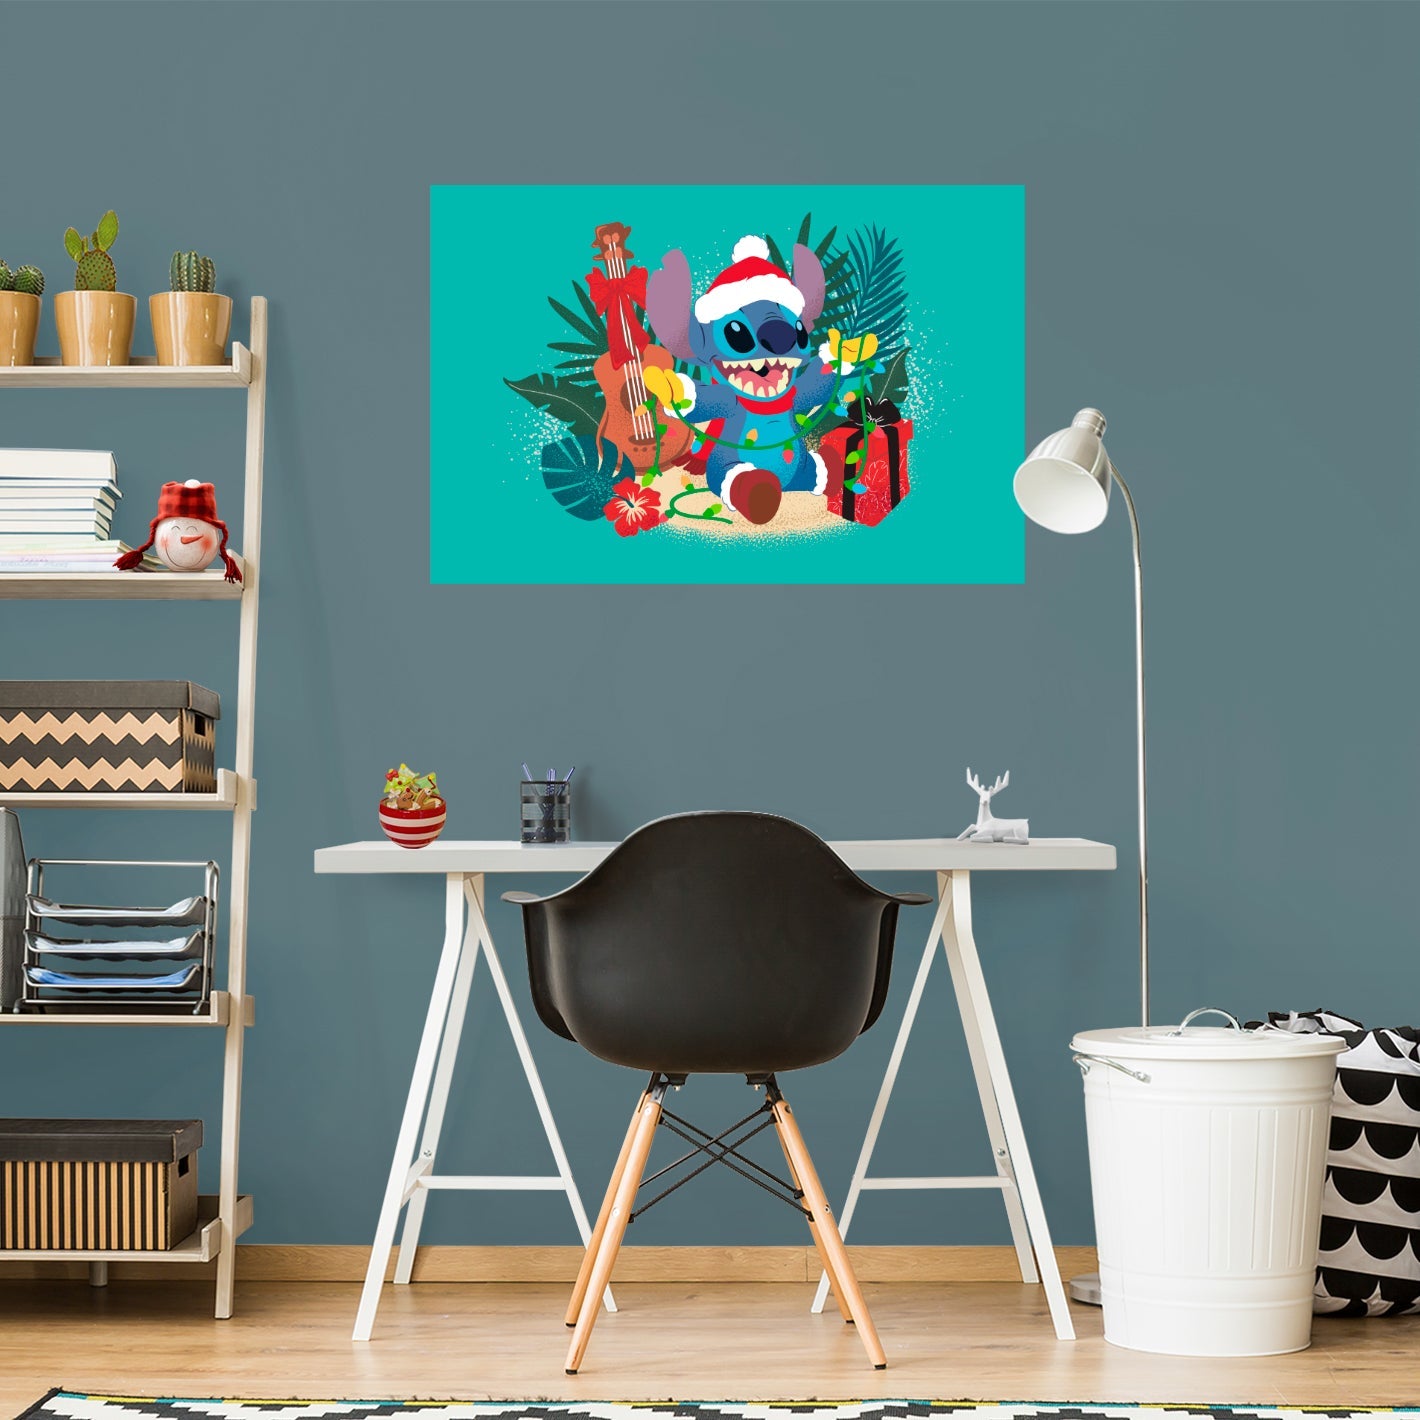 Lilo & Stitch Festive Cheer: Stitch Presents Mural - Officially Licensed Disney Removable Adhesive Decal